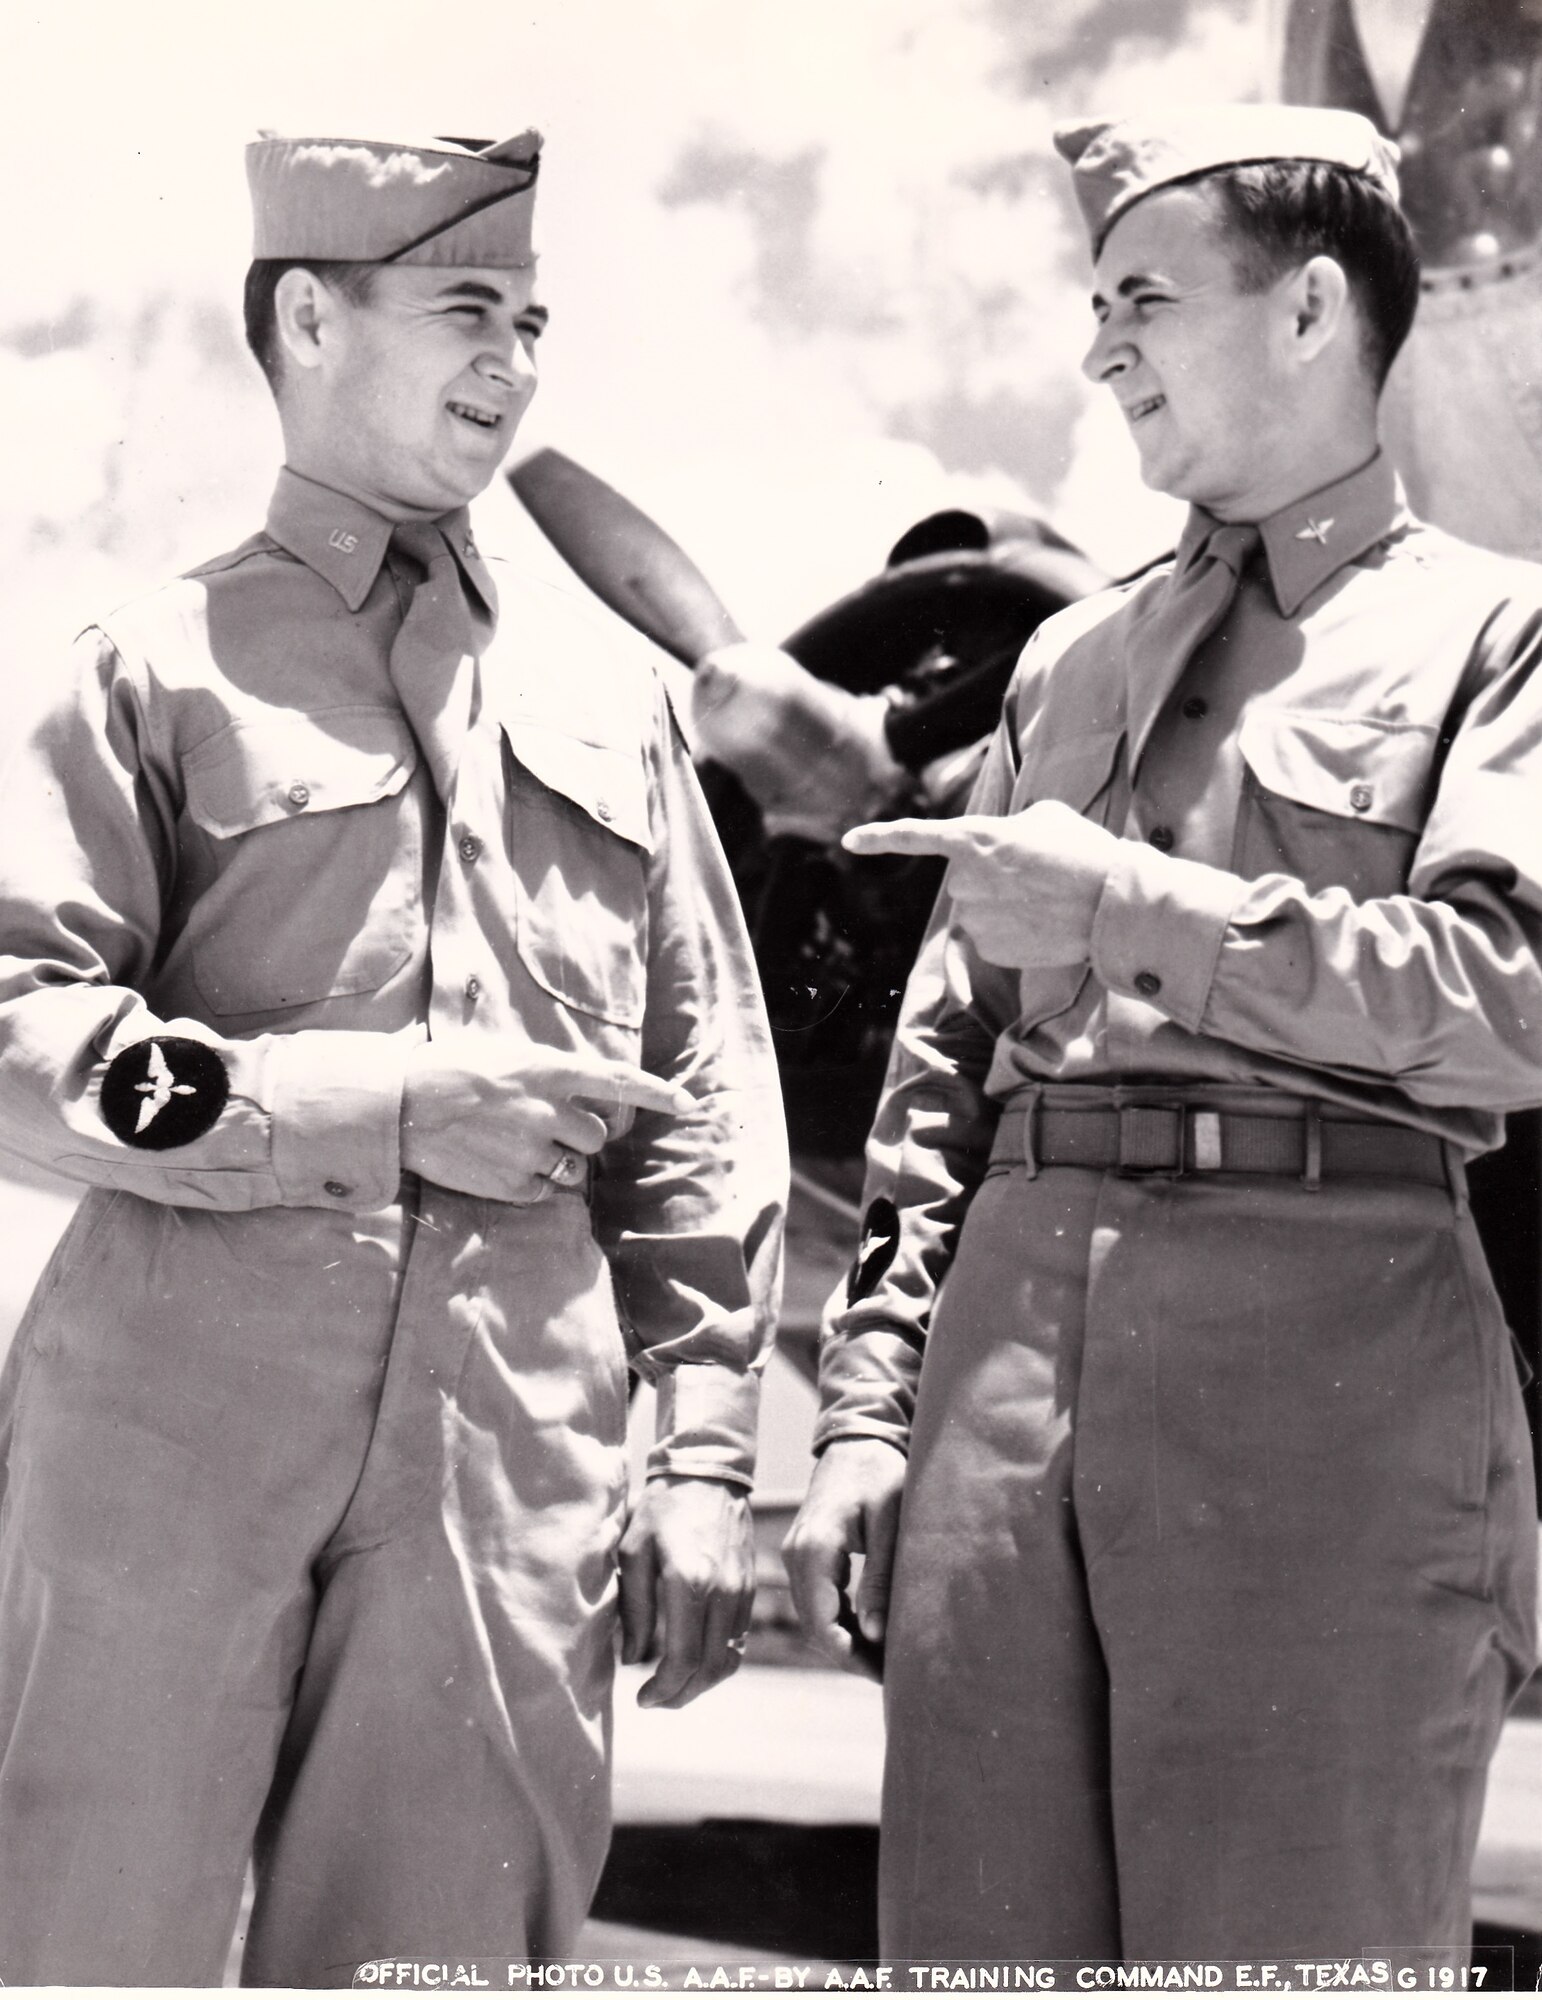 A vintage photo of retired Air Force Reserve Majs. Raymond “Glenn” Clanin and Russell “Lynn” Clanin during training in the Aviation Cadet program, prior to receiving their pilot's wings in August 1944 at Ellington Field, Texas. Seventy-one years later, the 92-year-old twin brothers are recipients of the French government's highest distinction for their military service as World War II veterans, the Legion of Honor medal, presented by Christophe Lemoine, French consul general in Los Angeles, during a ceremony held at Los Angeles Air Force base in El Segundo, Calif. (Courtesy photo, U.S. Army Air Forces, AAF Training Command, Ellington Field, Texas)